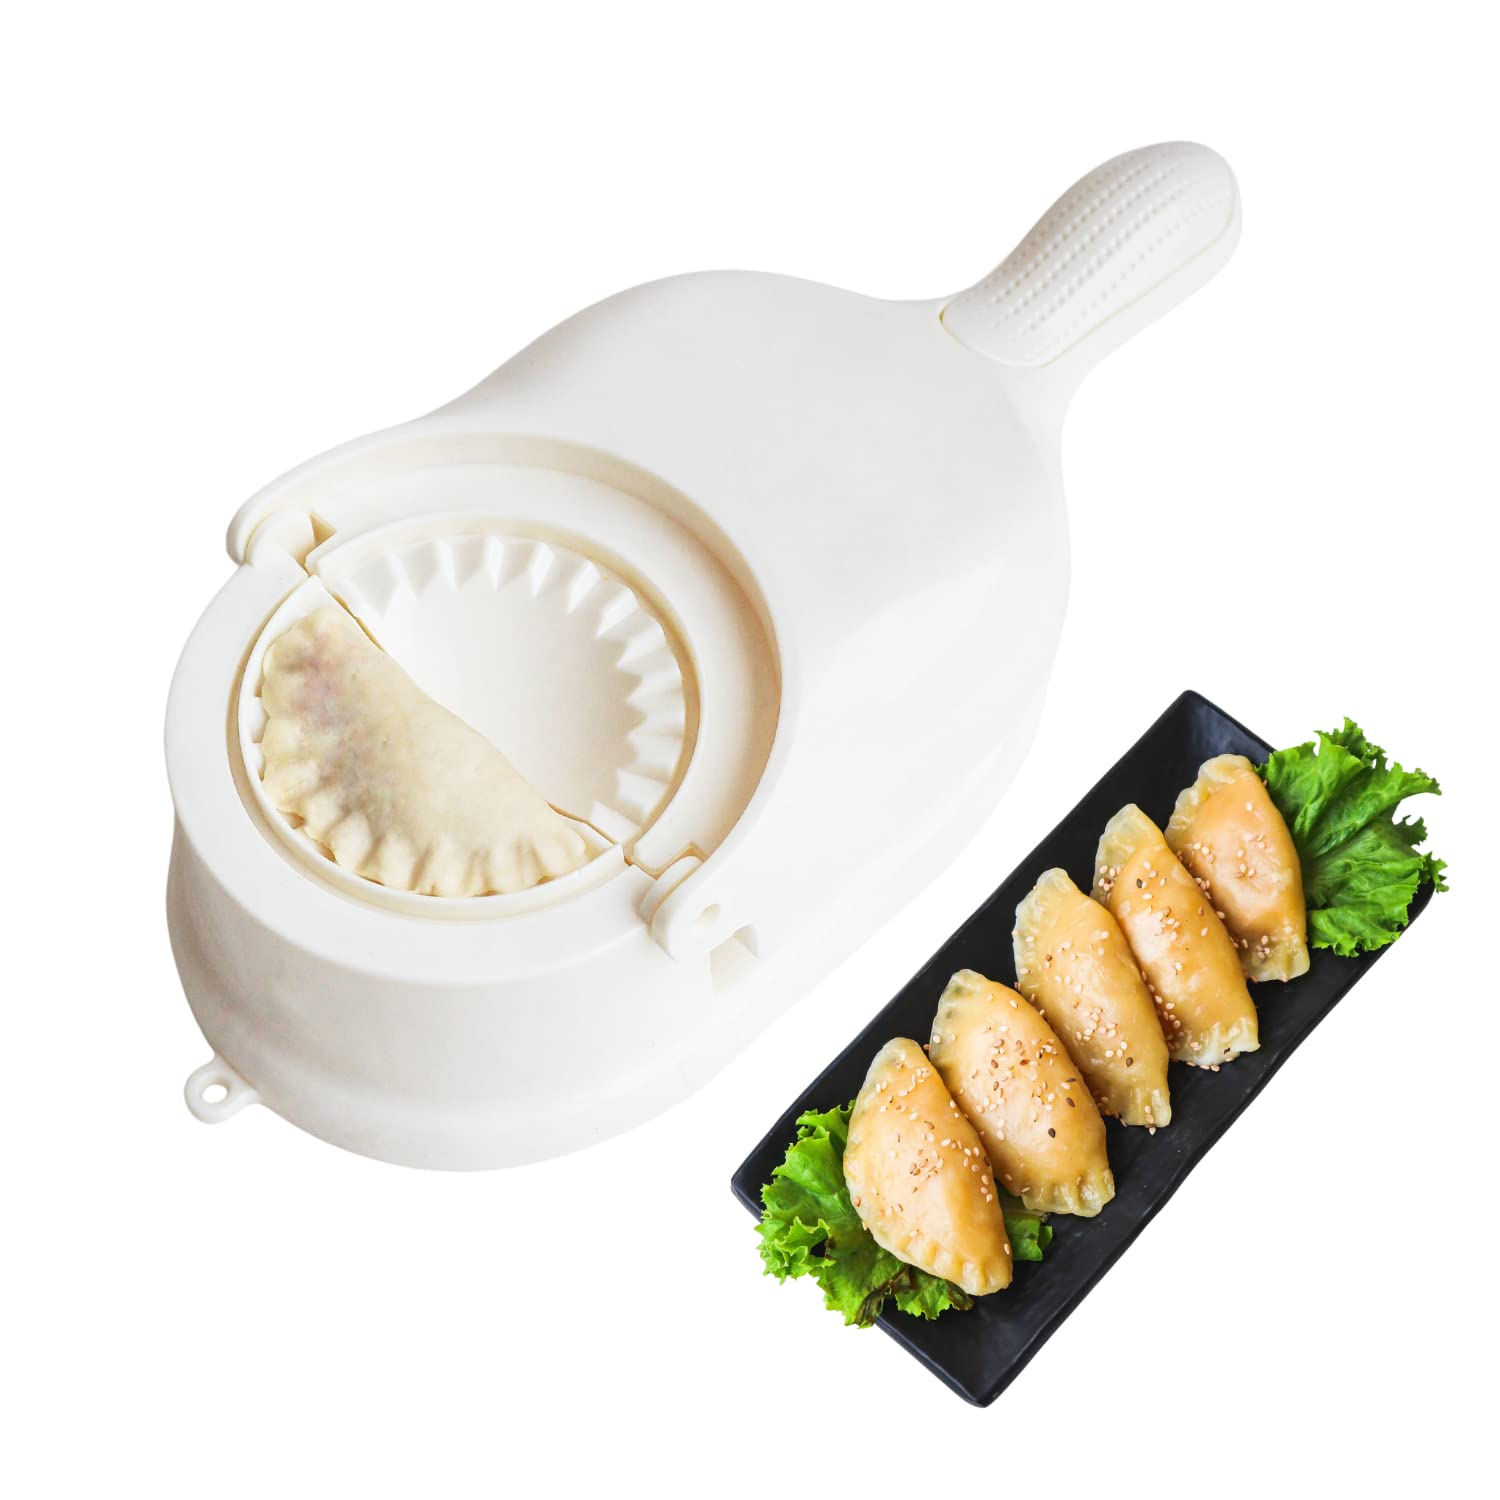 InstaCuppa 2-in-1 Dumpling Maker - Quick & Easy Meals for Busy